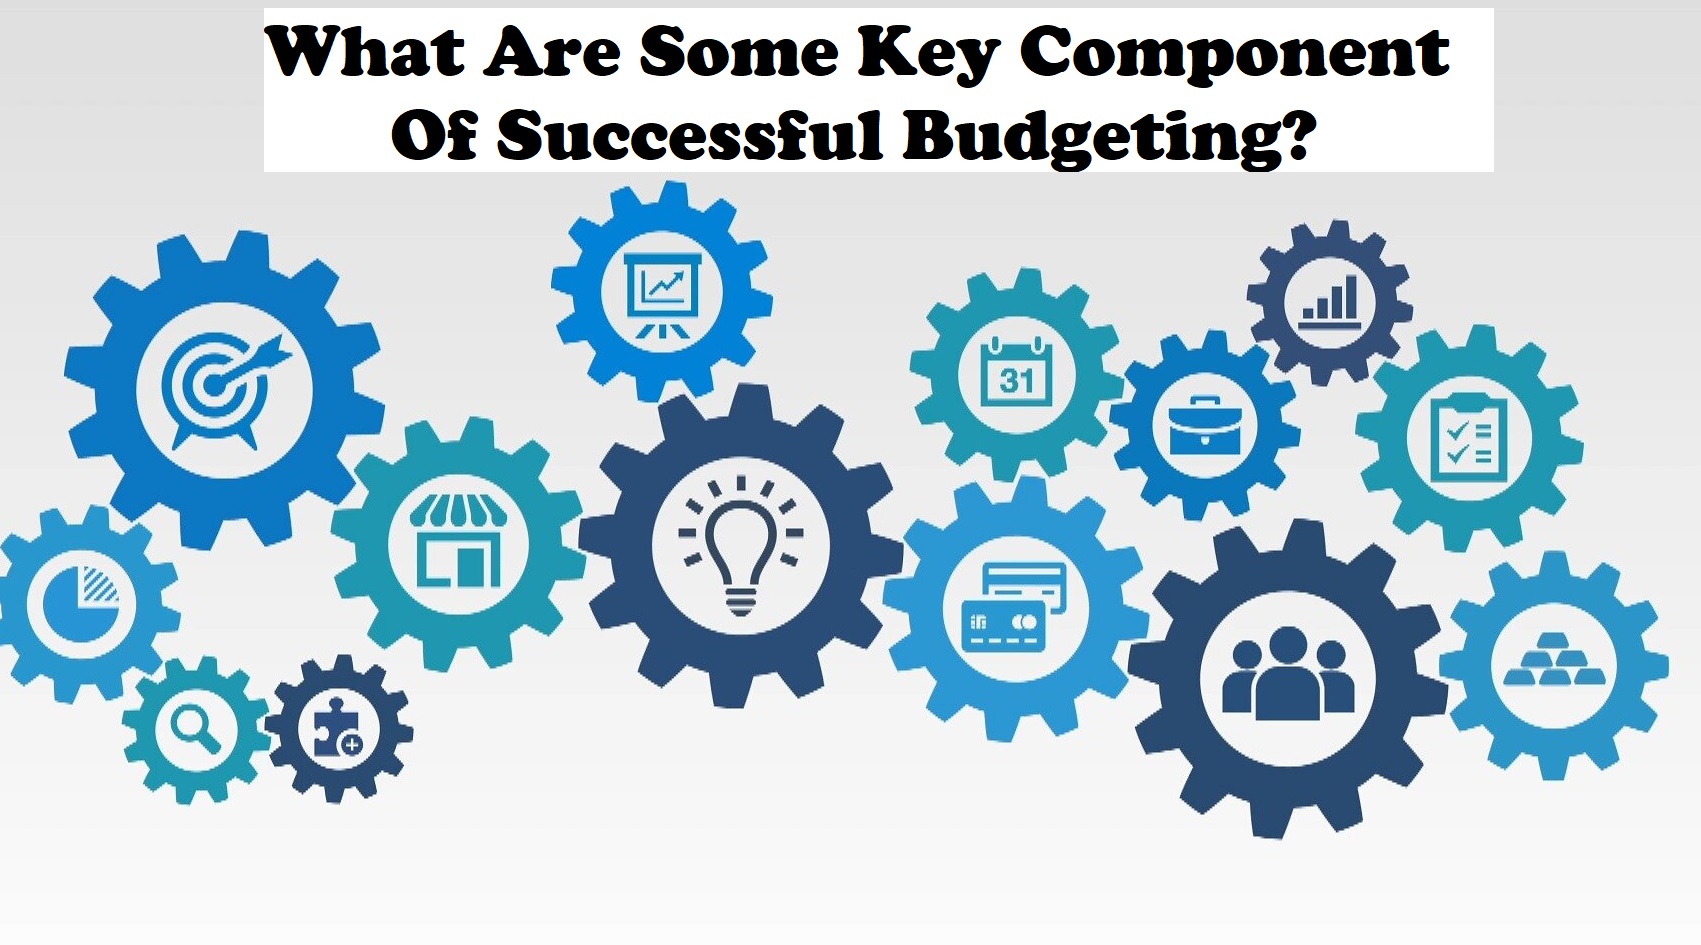 What Are Some Key Component Of Successful Budgeting?